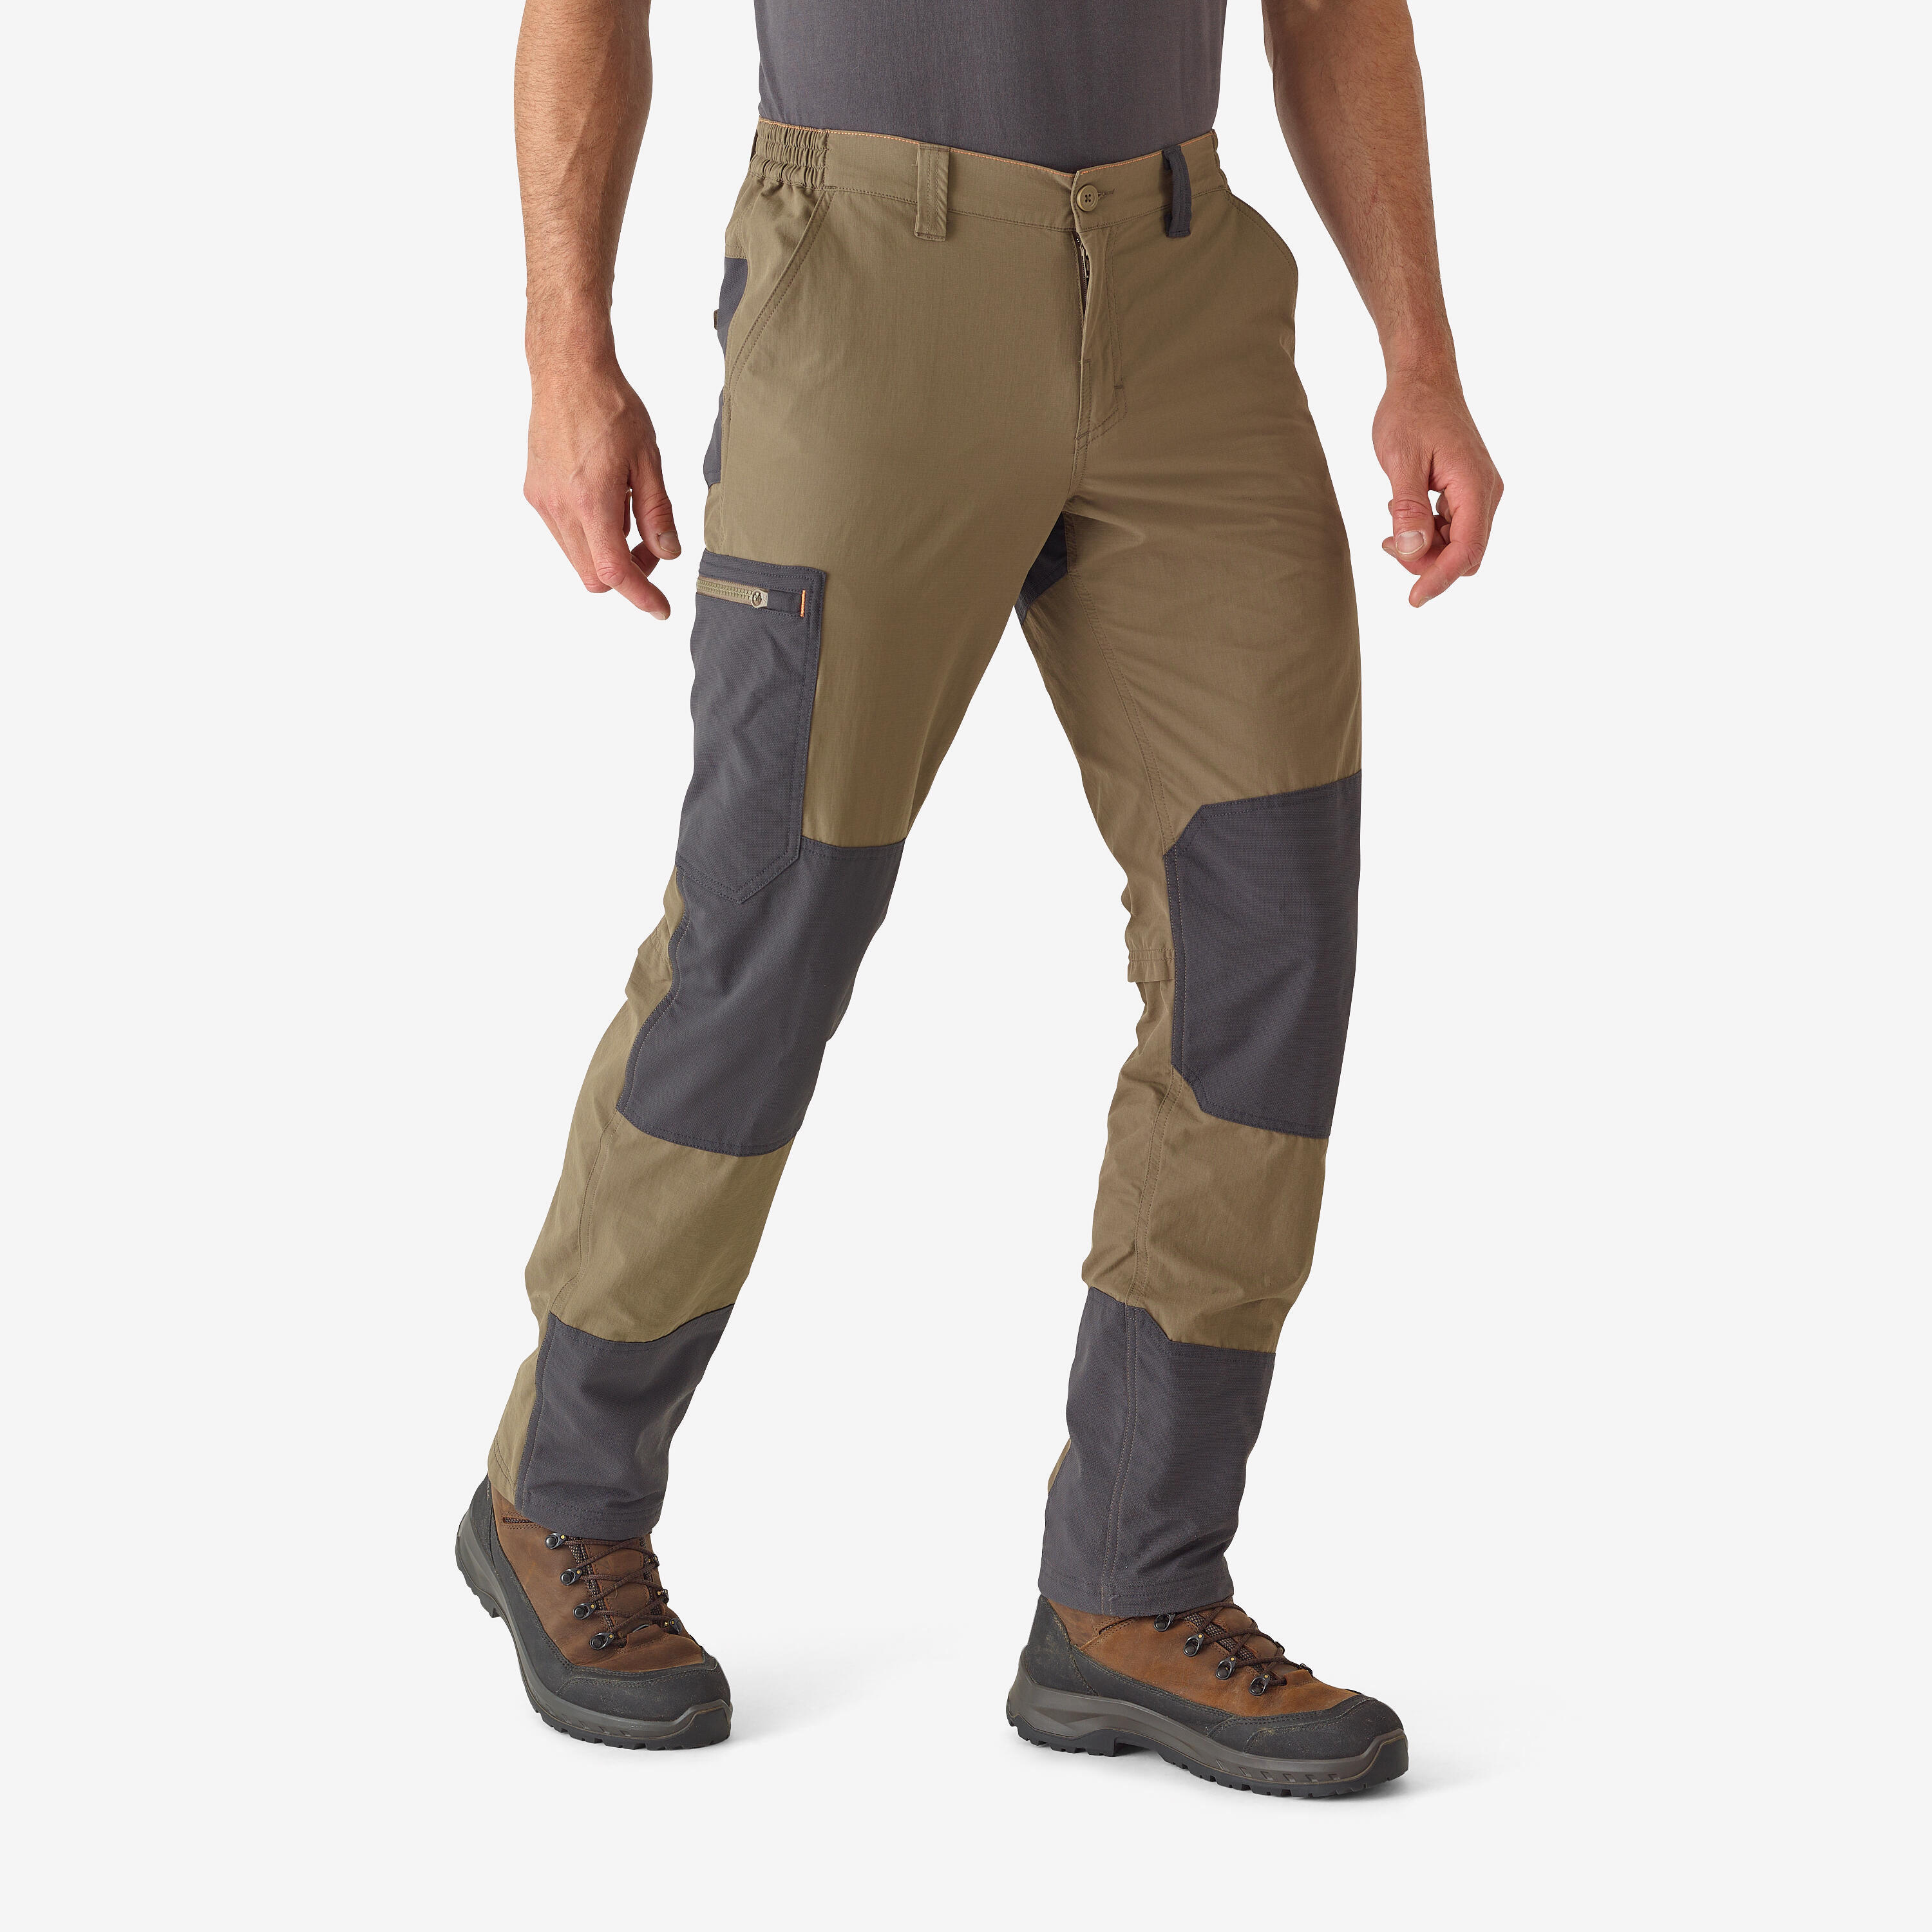 SOLOGNAC BREATHABLE AND DURABLE TROUSERS 520 BROWN